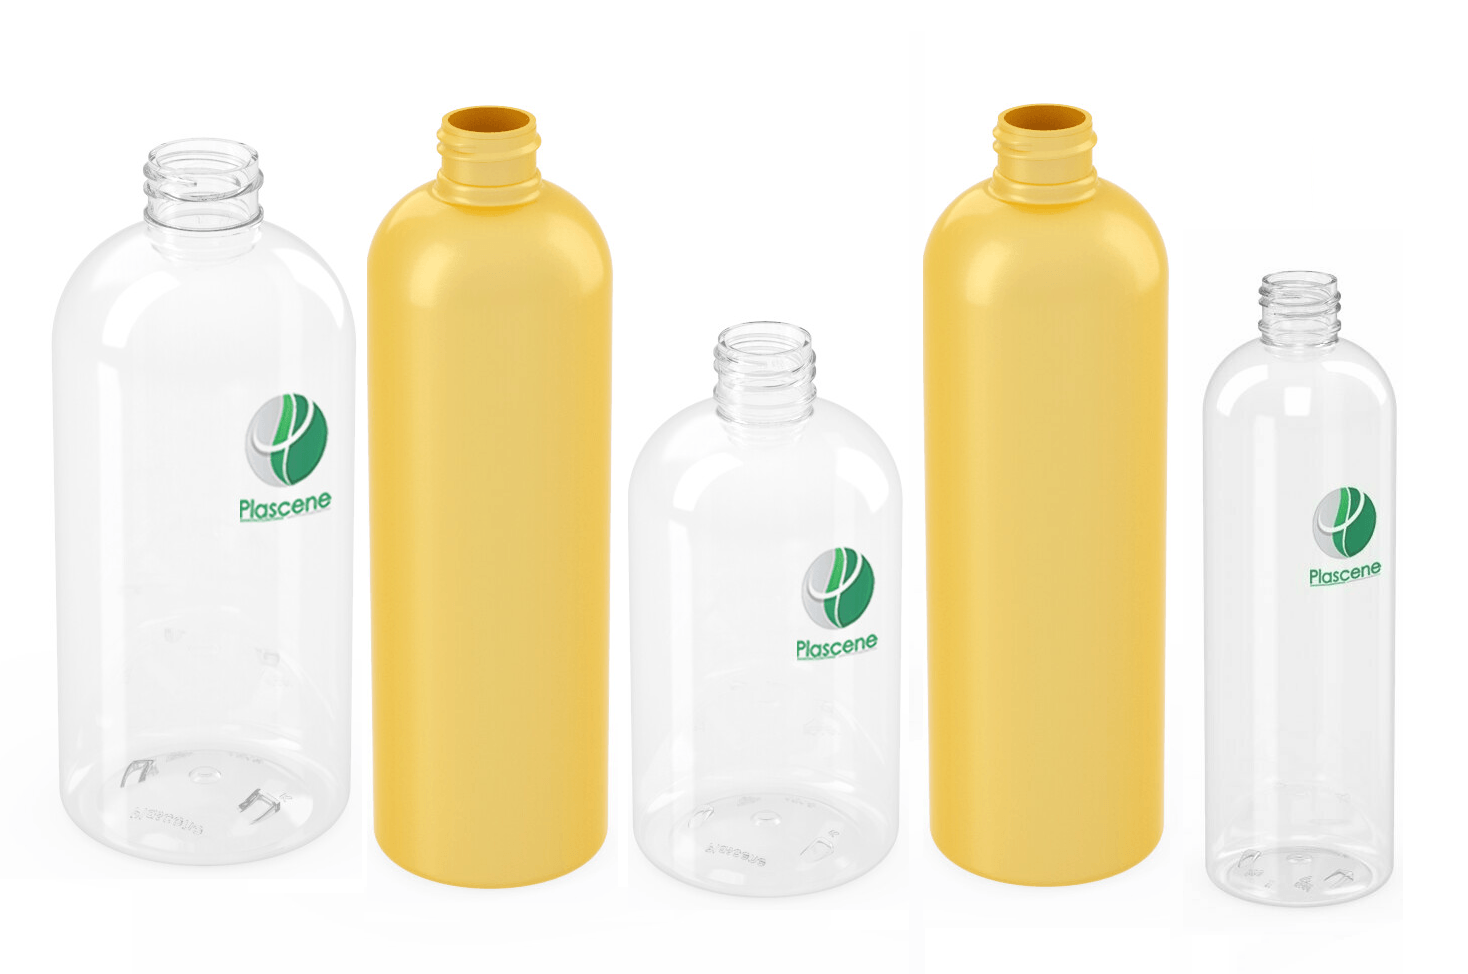 Boston round bottles made from clear and opaque plastic